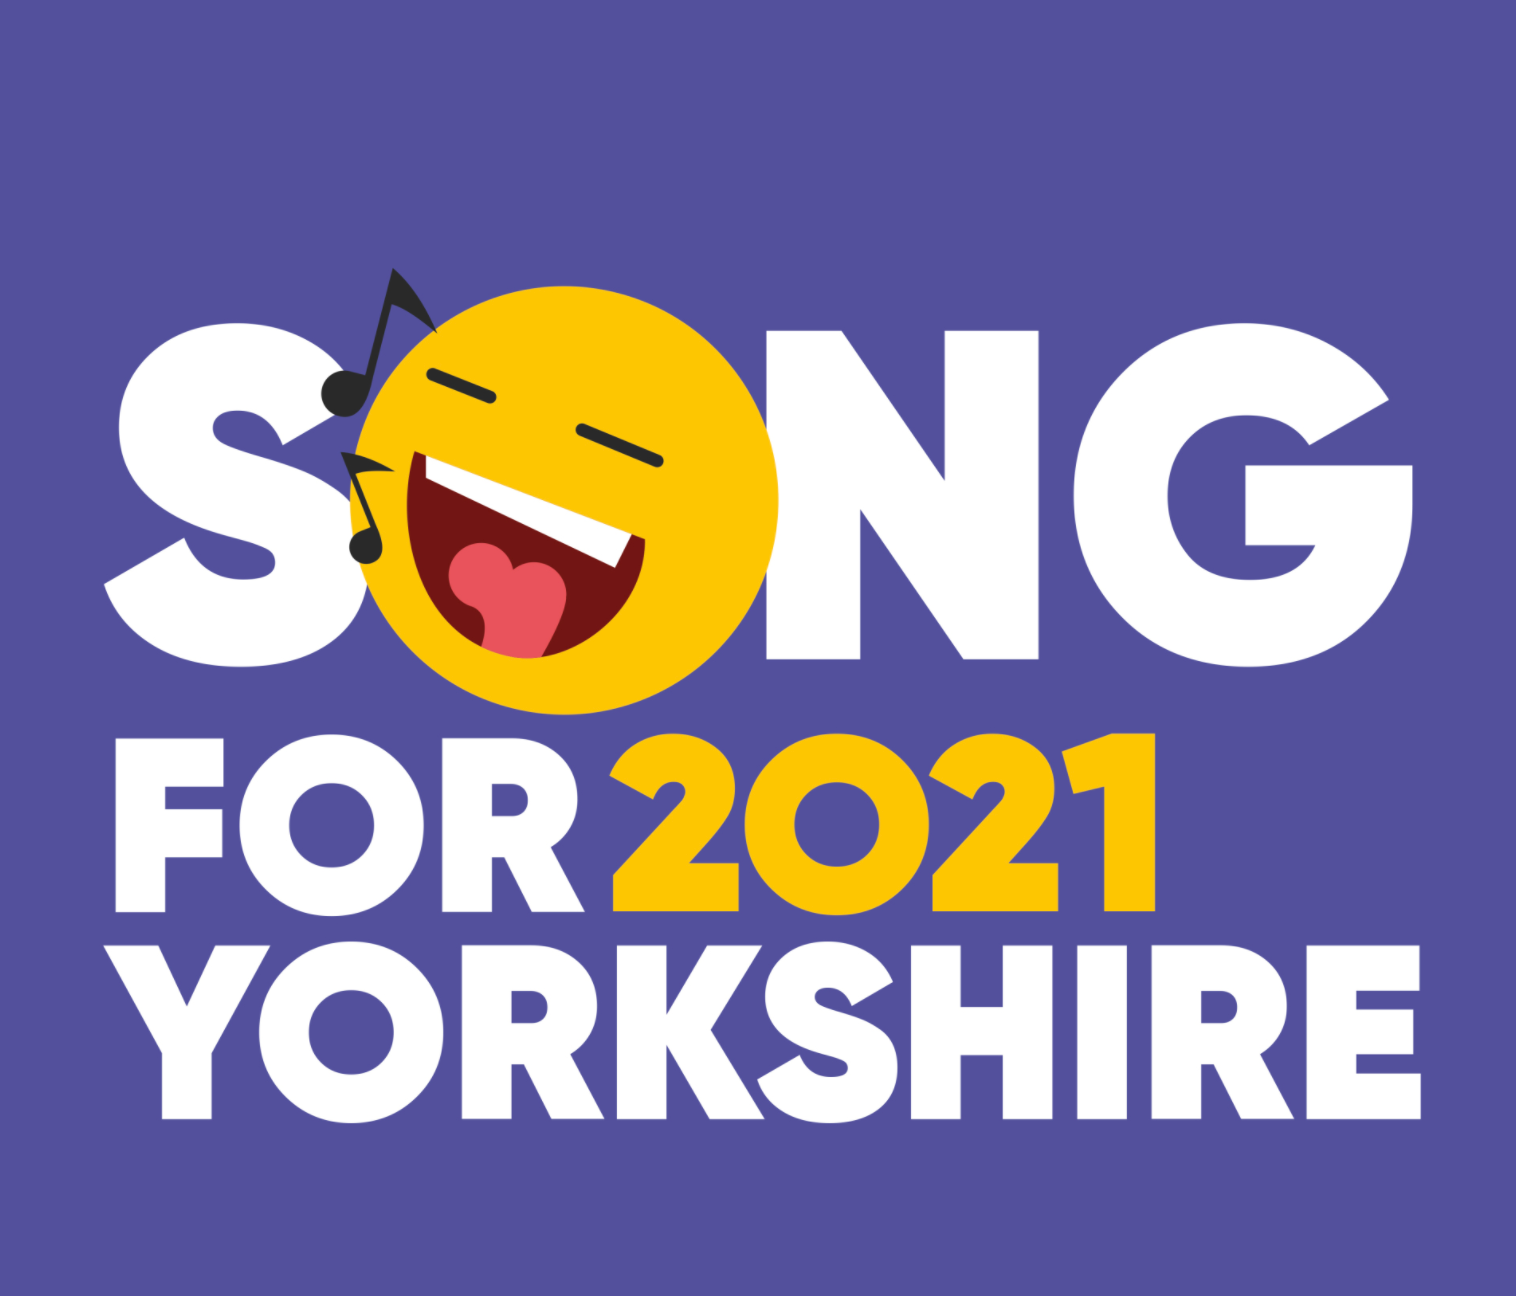 Welcome to Yorkshire and LNER’s “Song for Yorkshire” fab four finalists revealed – vote now